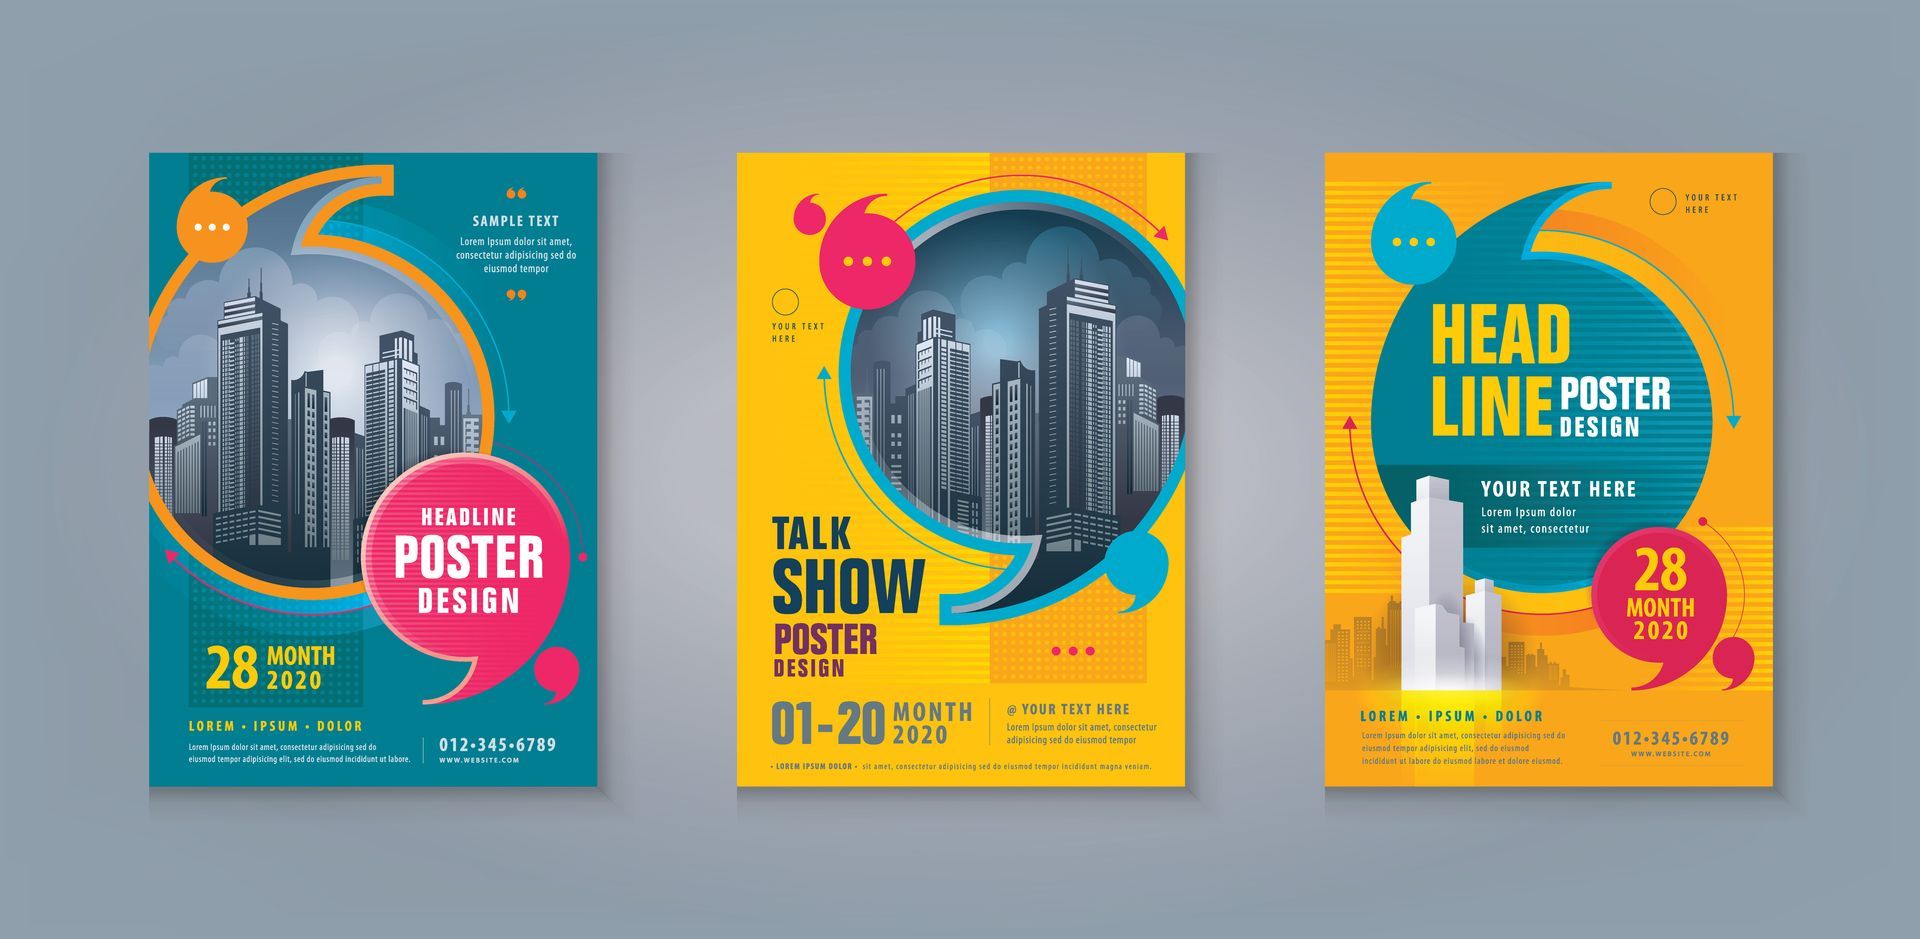 Buckeye Custom Posters For Conferences & Trade Shows